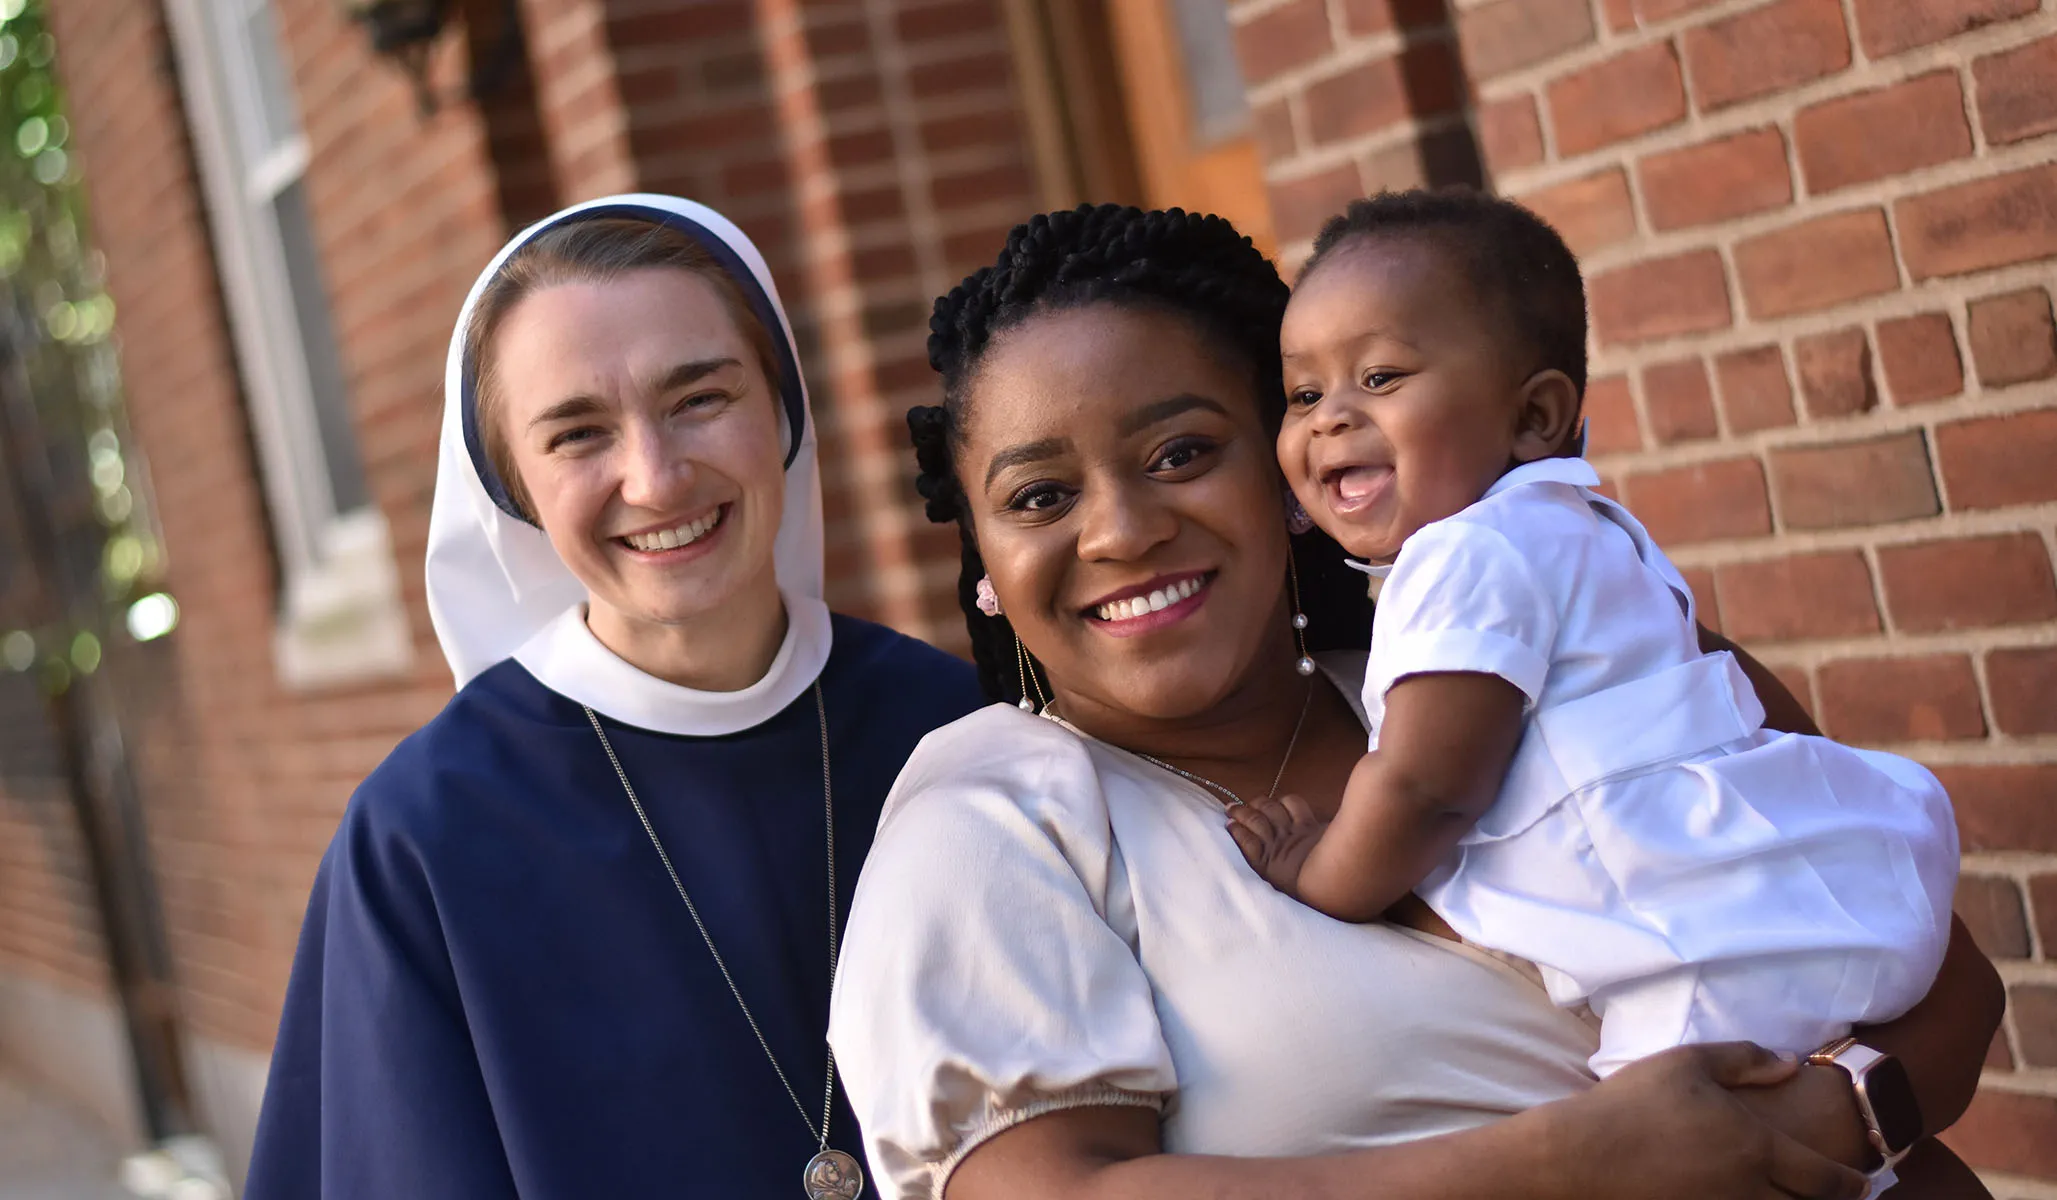 Sisters of Life helps pregnant women who think abortion is their only choice